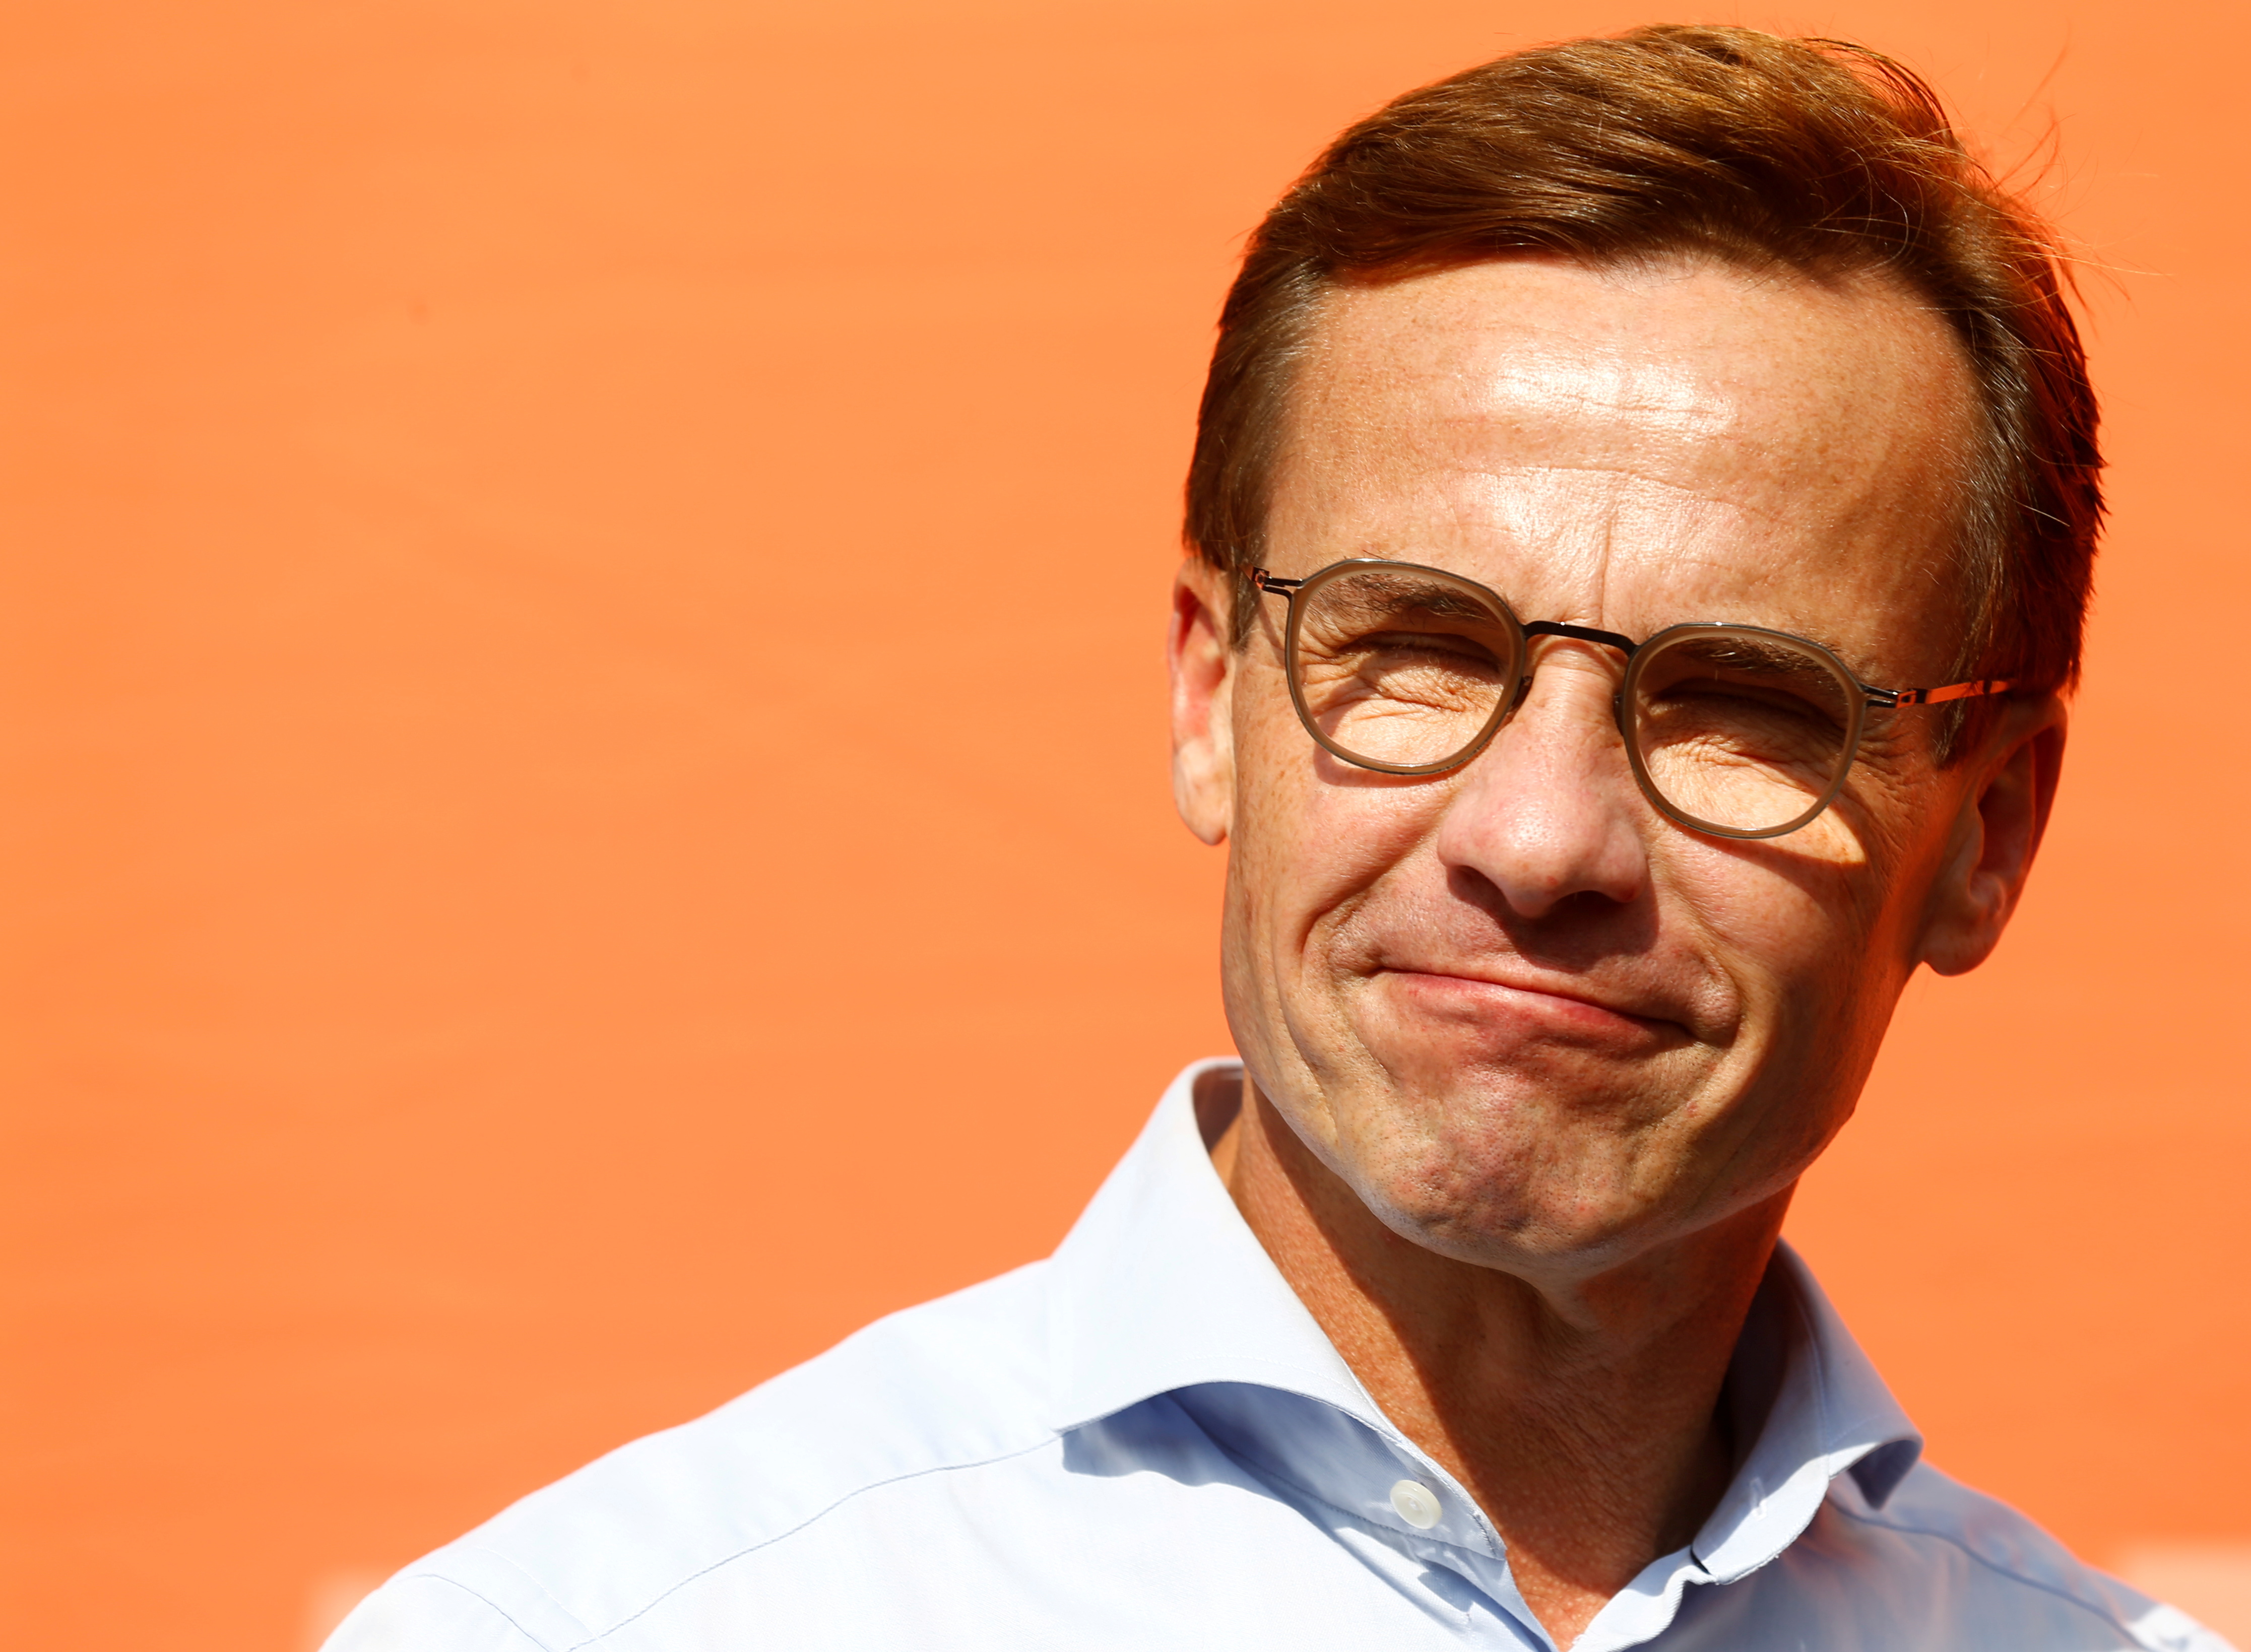 Sweden's Moderate Party leader Ulf Kristersson during the election campaign in Stockholm